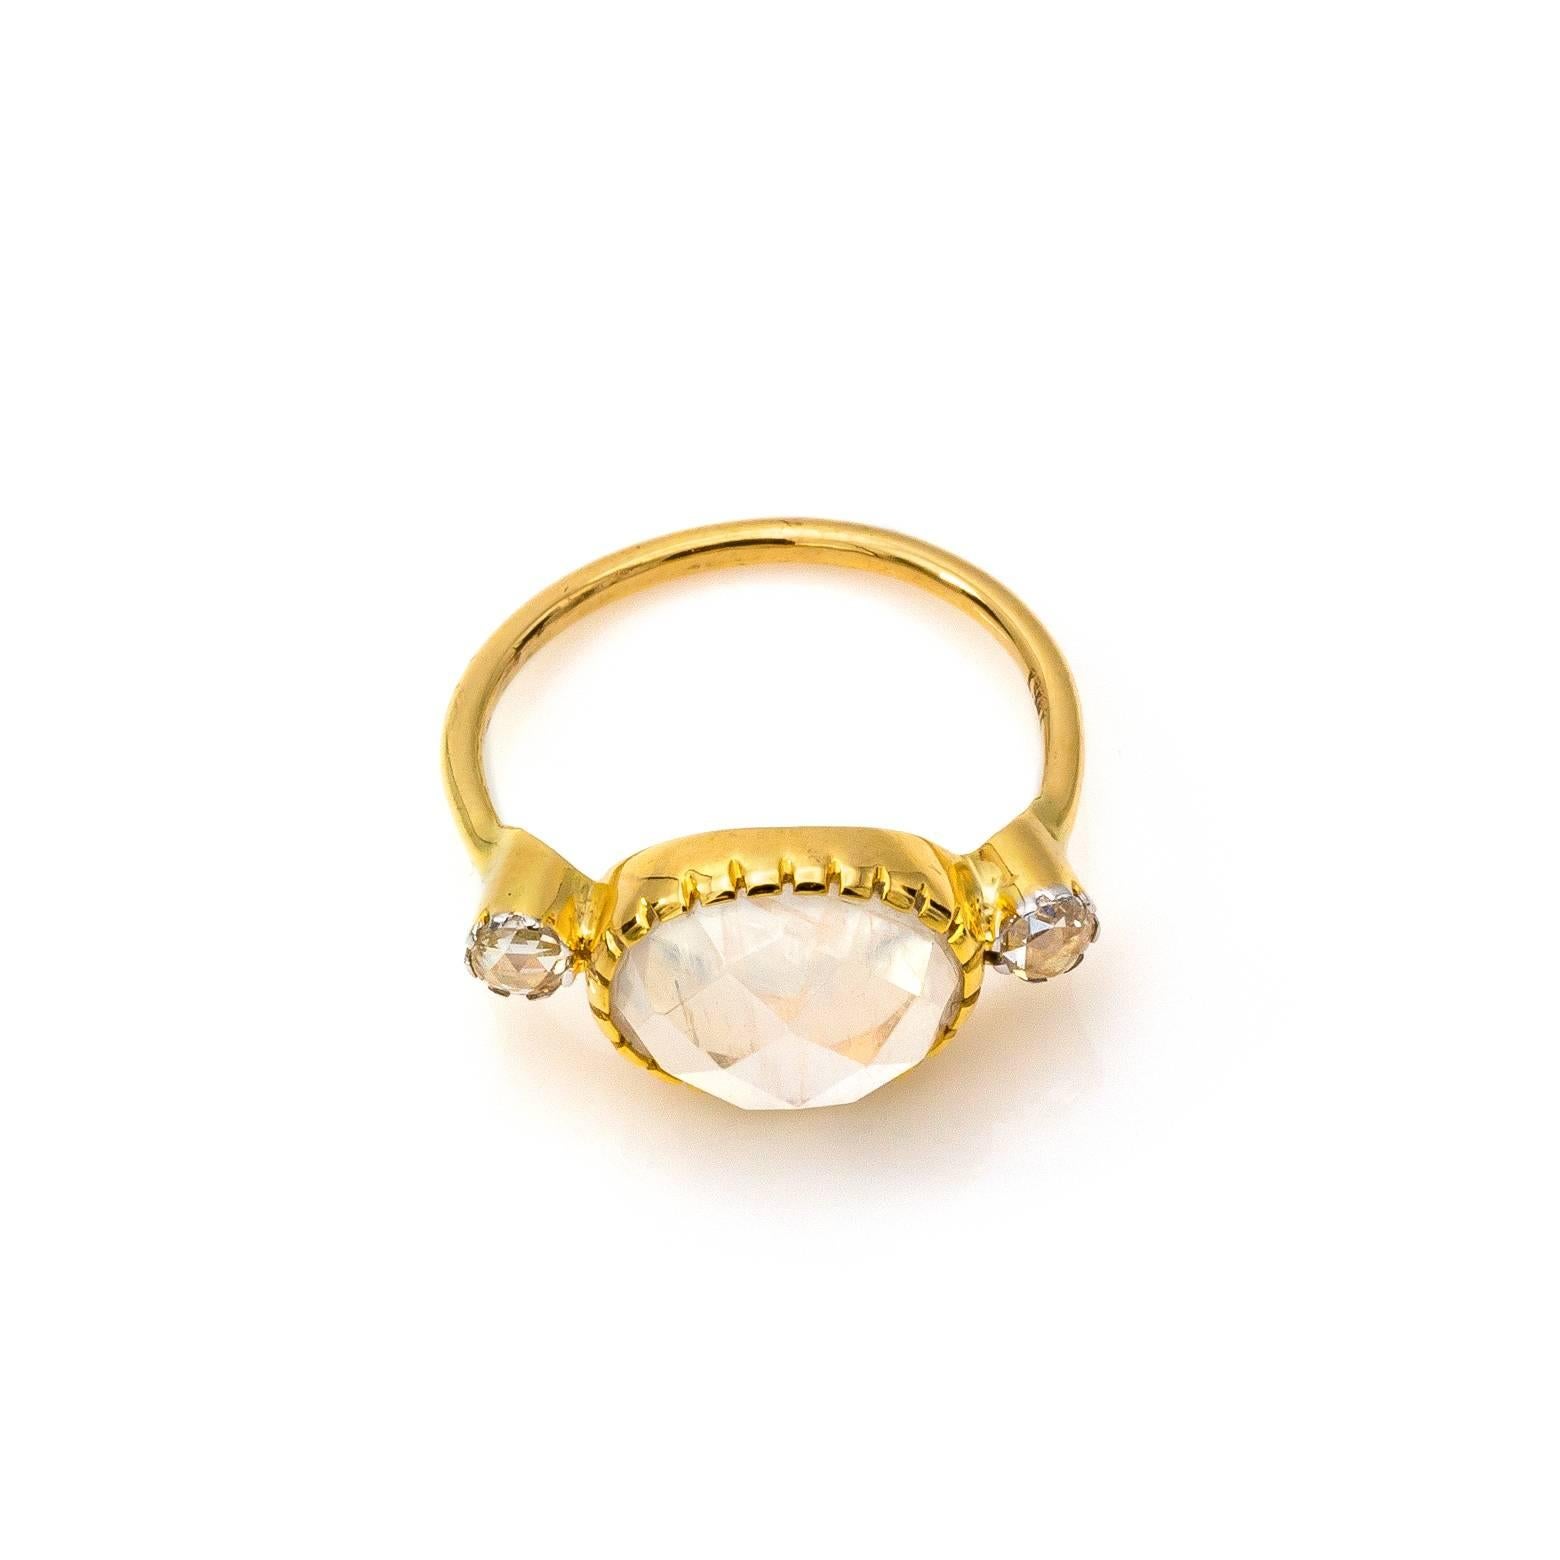 The bright whites sparkle with moonstone and diamonds in 18K yellow gold. The intricate bezel adds style and flare creating a regal look fit for a goddess. The high carat yellow gold with the celestial faceted stones are mesmerizing and magical. The